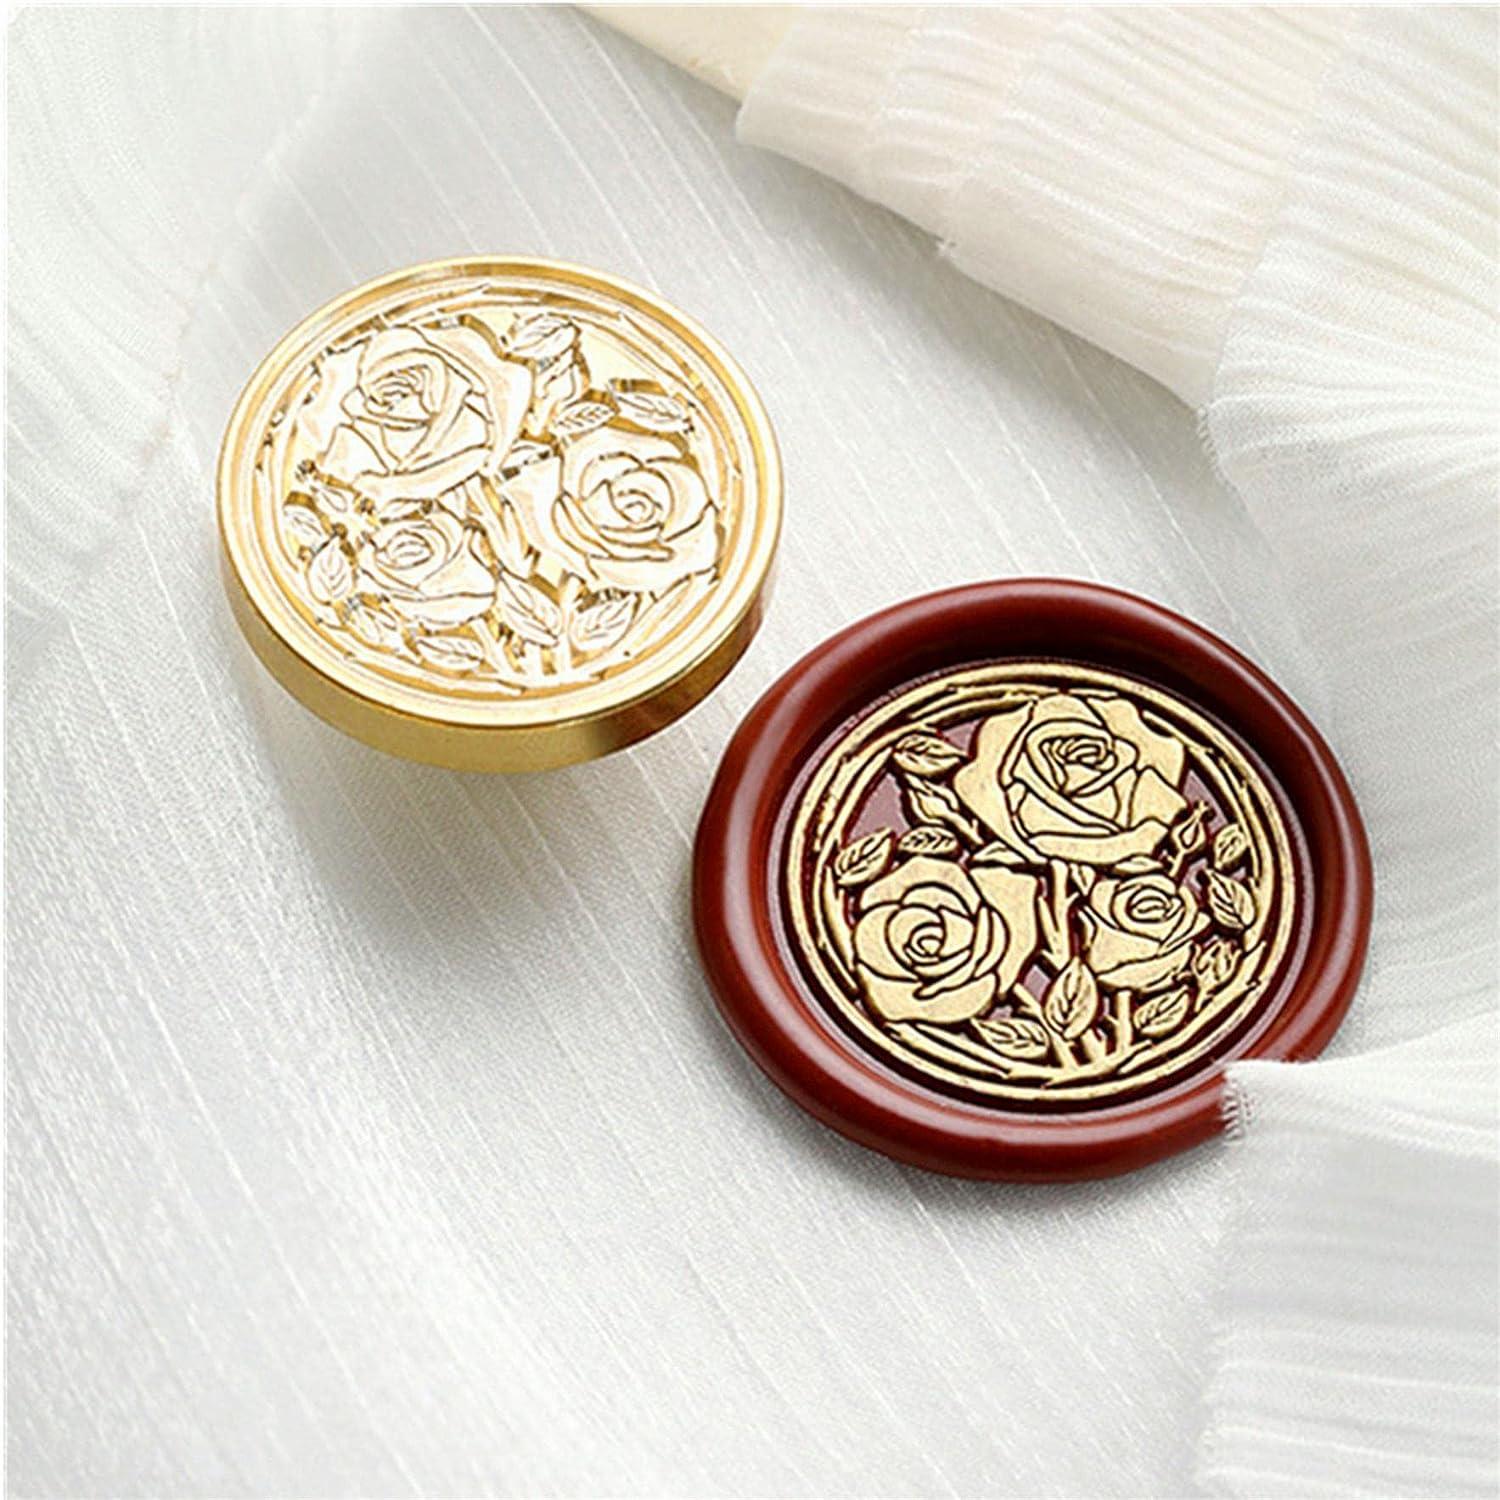 Wax Seal Stamp Set 6 Patterns for Christmas Present - China Wax Seal Stamp  and Wax Seal Stamp Gift Set price